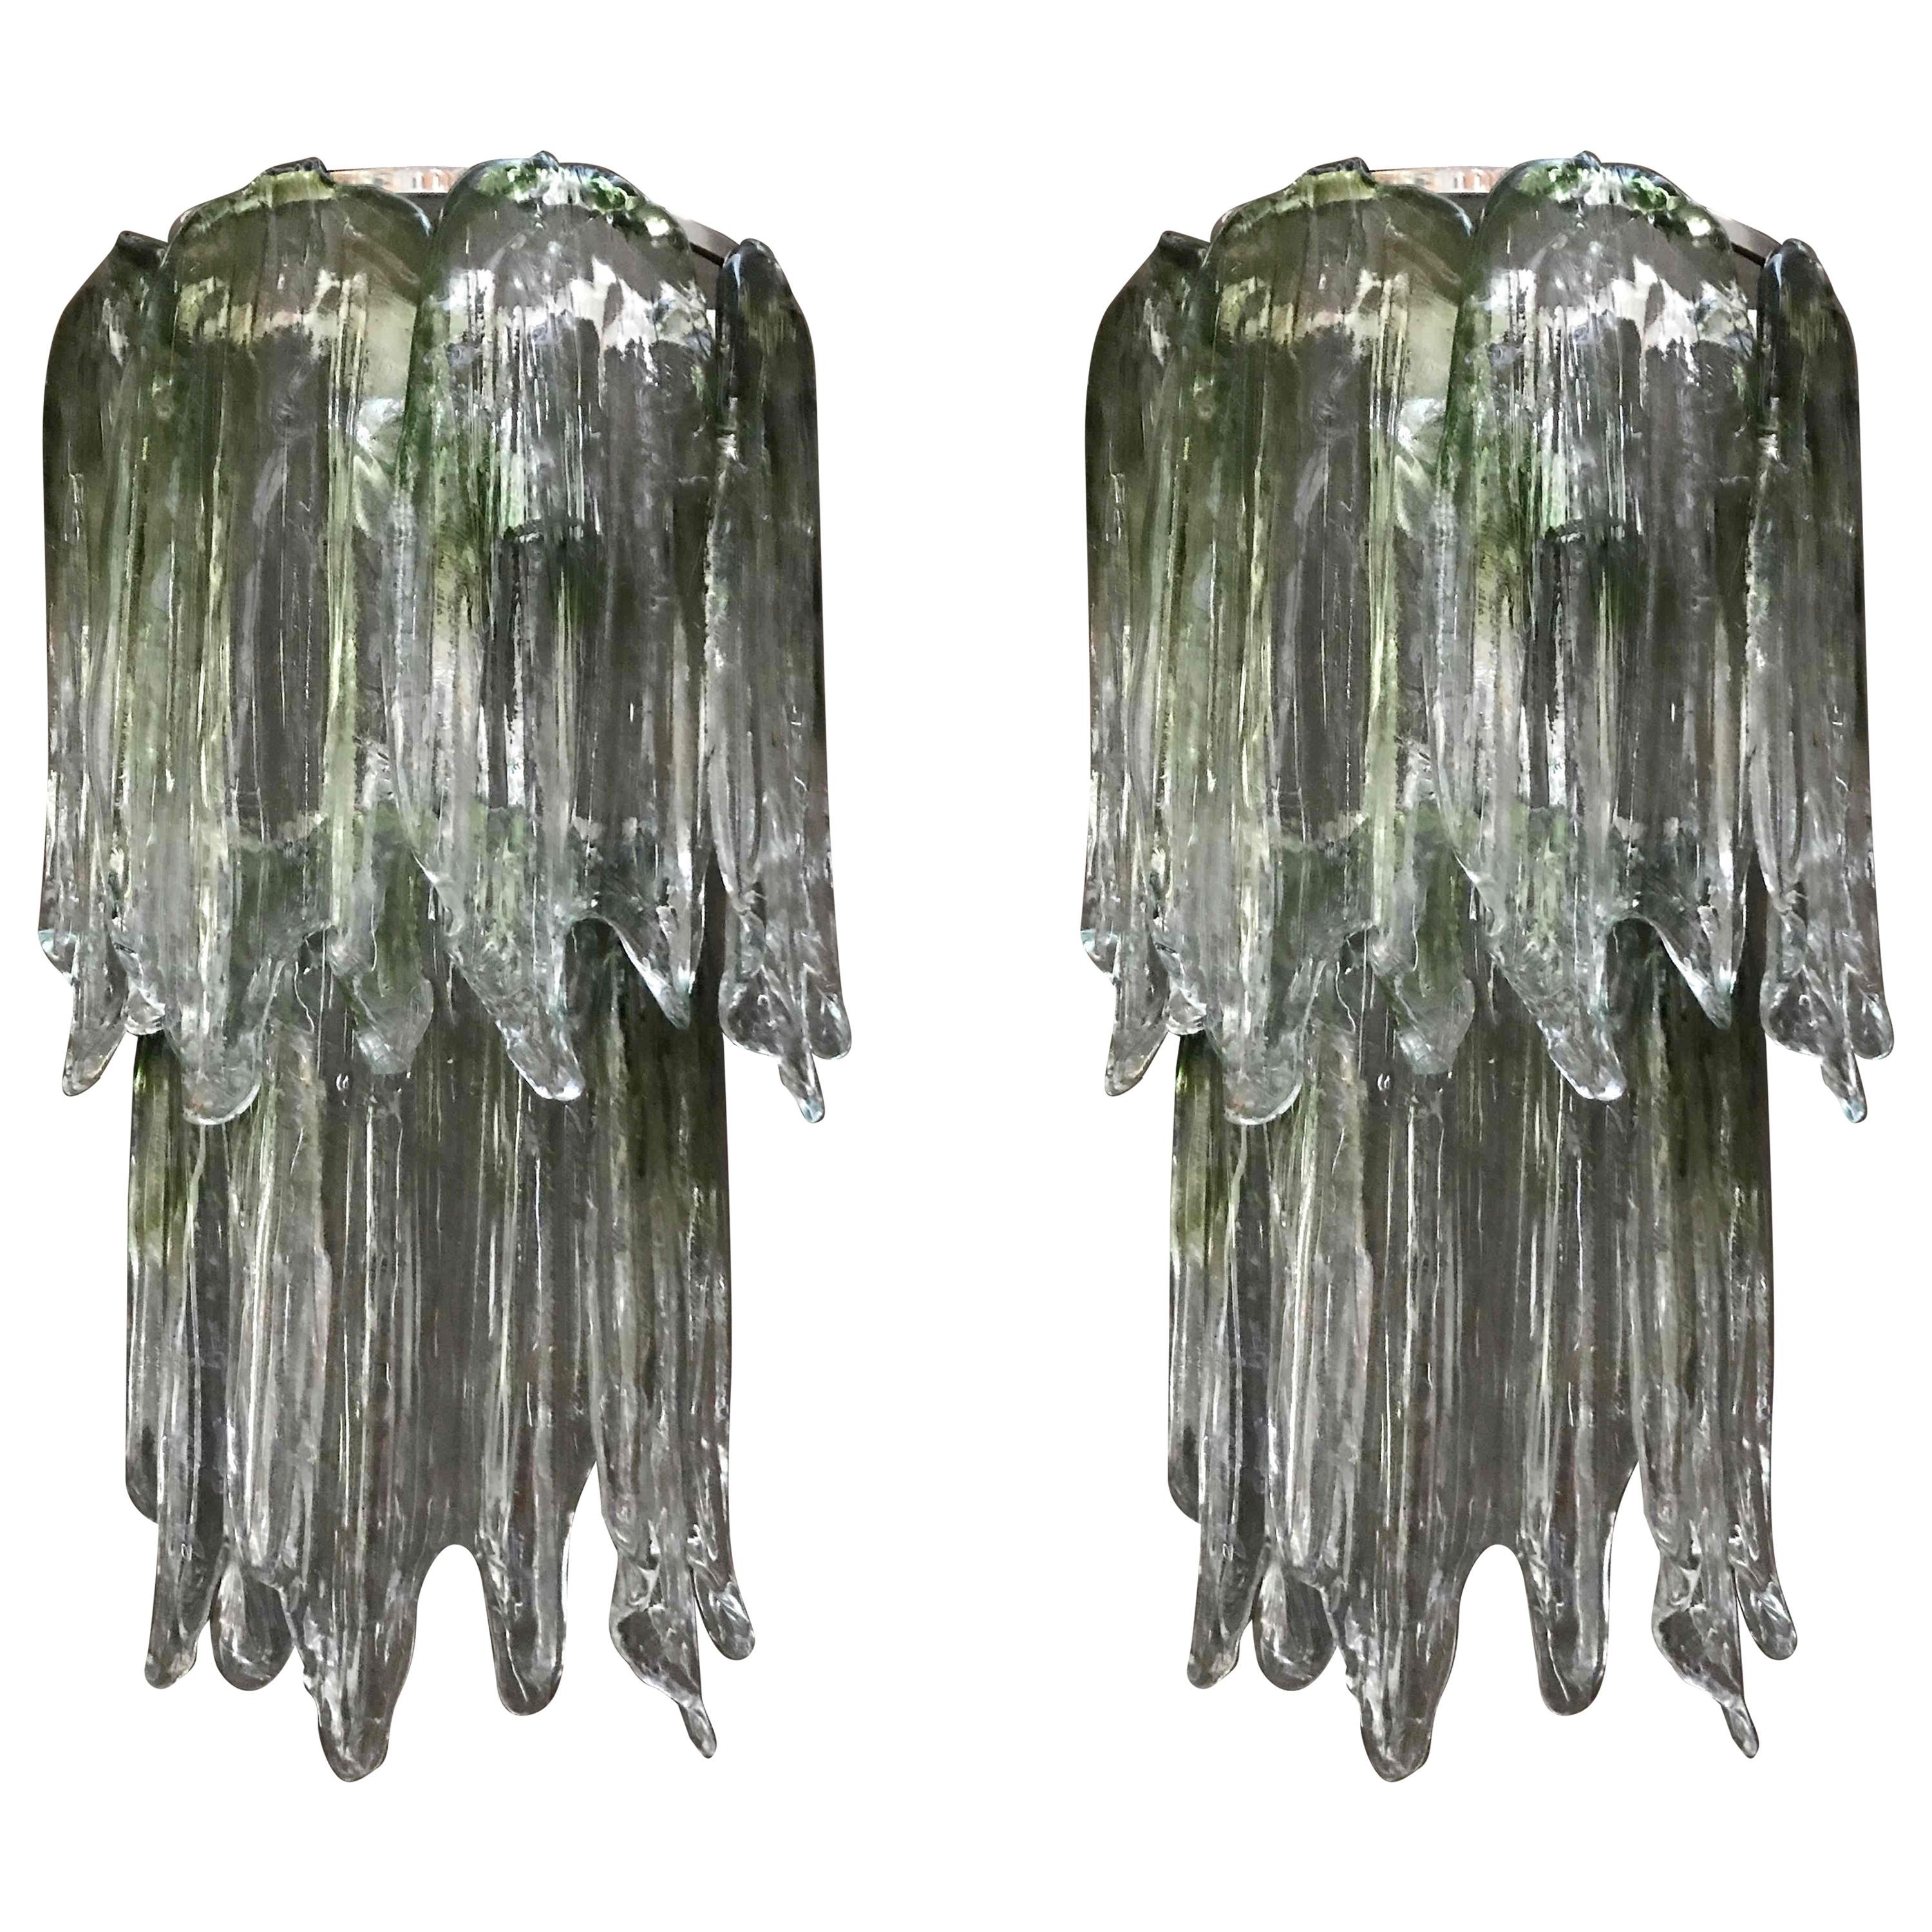 Pair of Large Fiamme Sconces by Mazzega For Sale